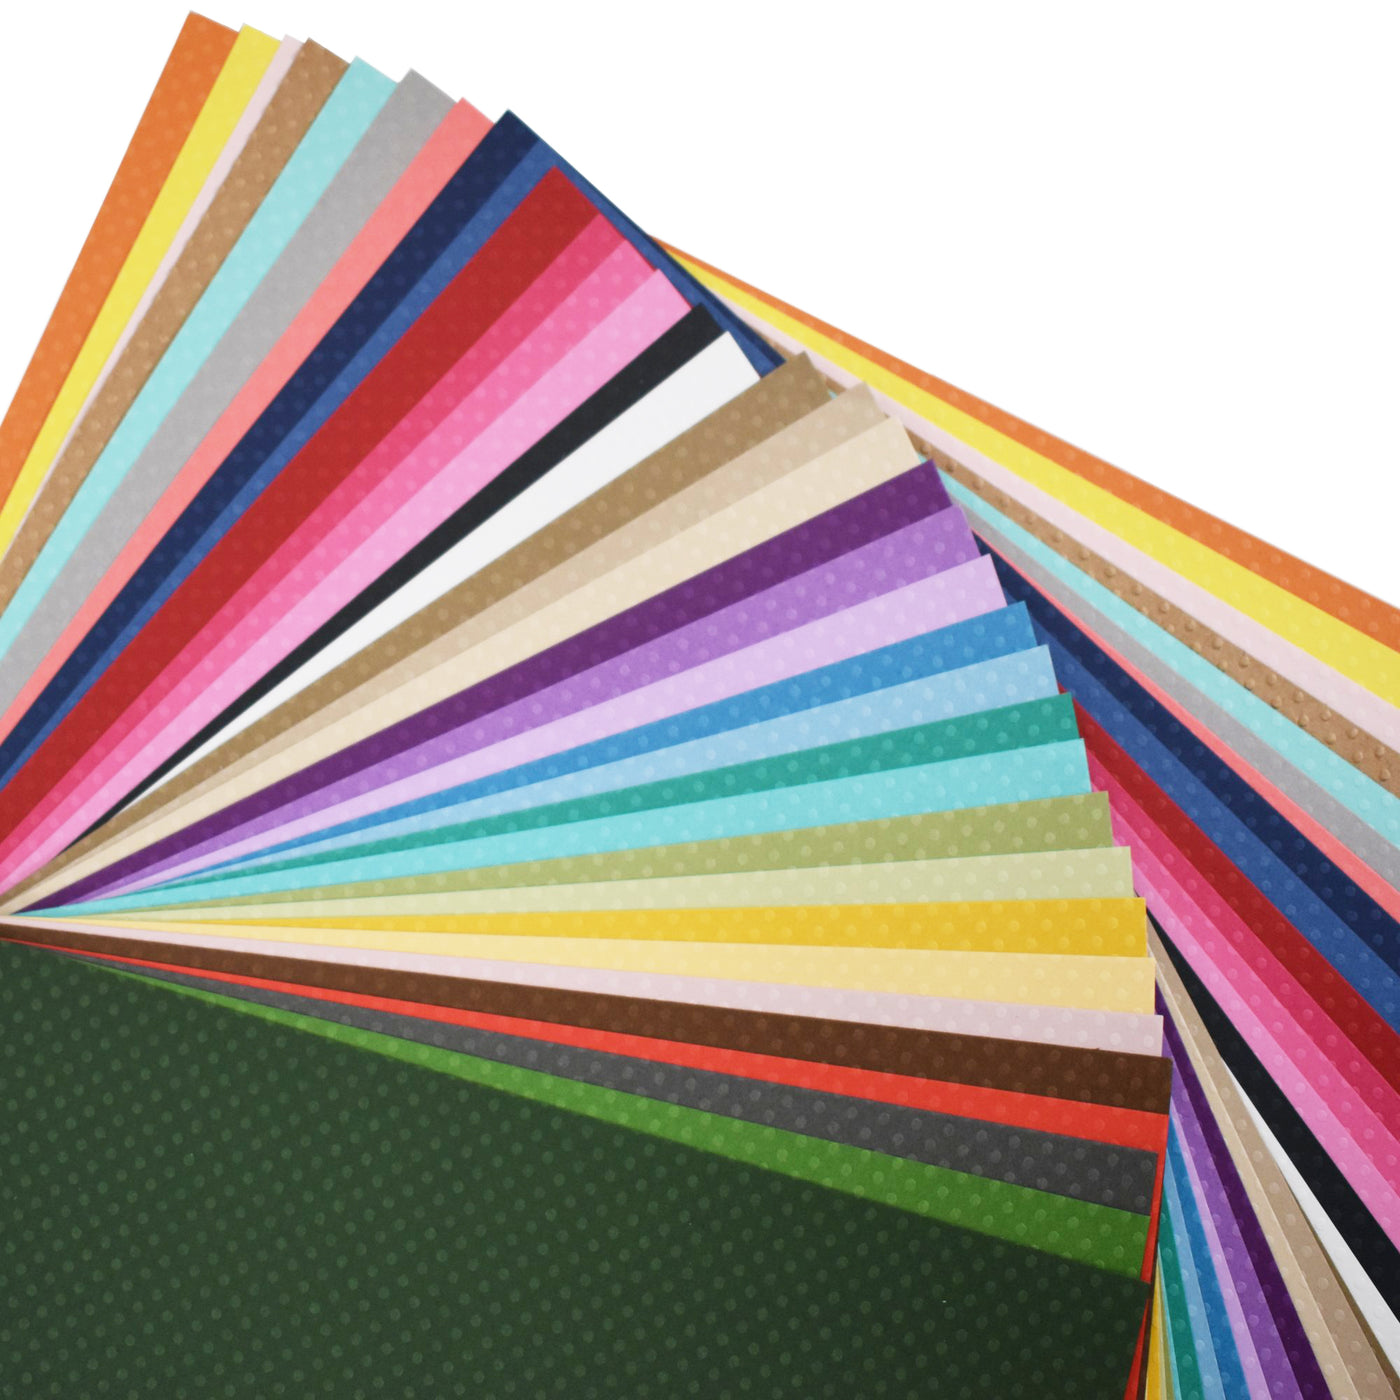 All 35 colors of Bazzill 12x12 Dotted Swiss in a single assortment pack